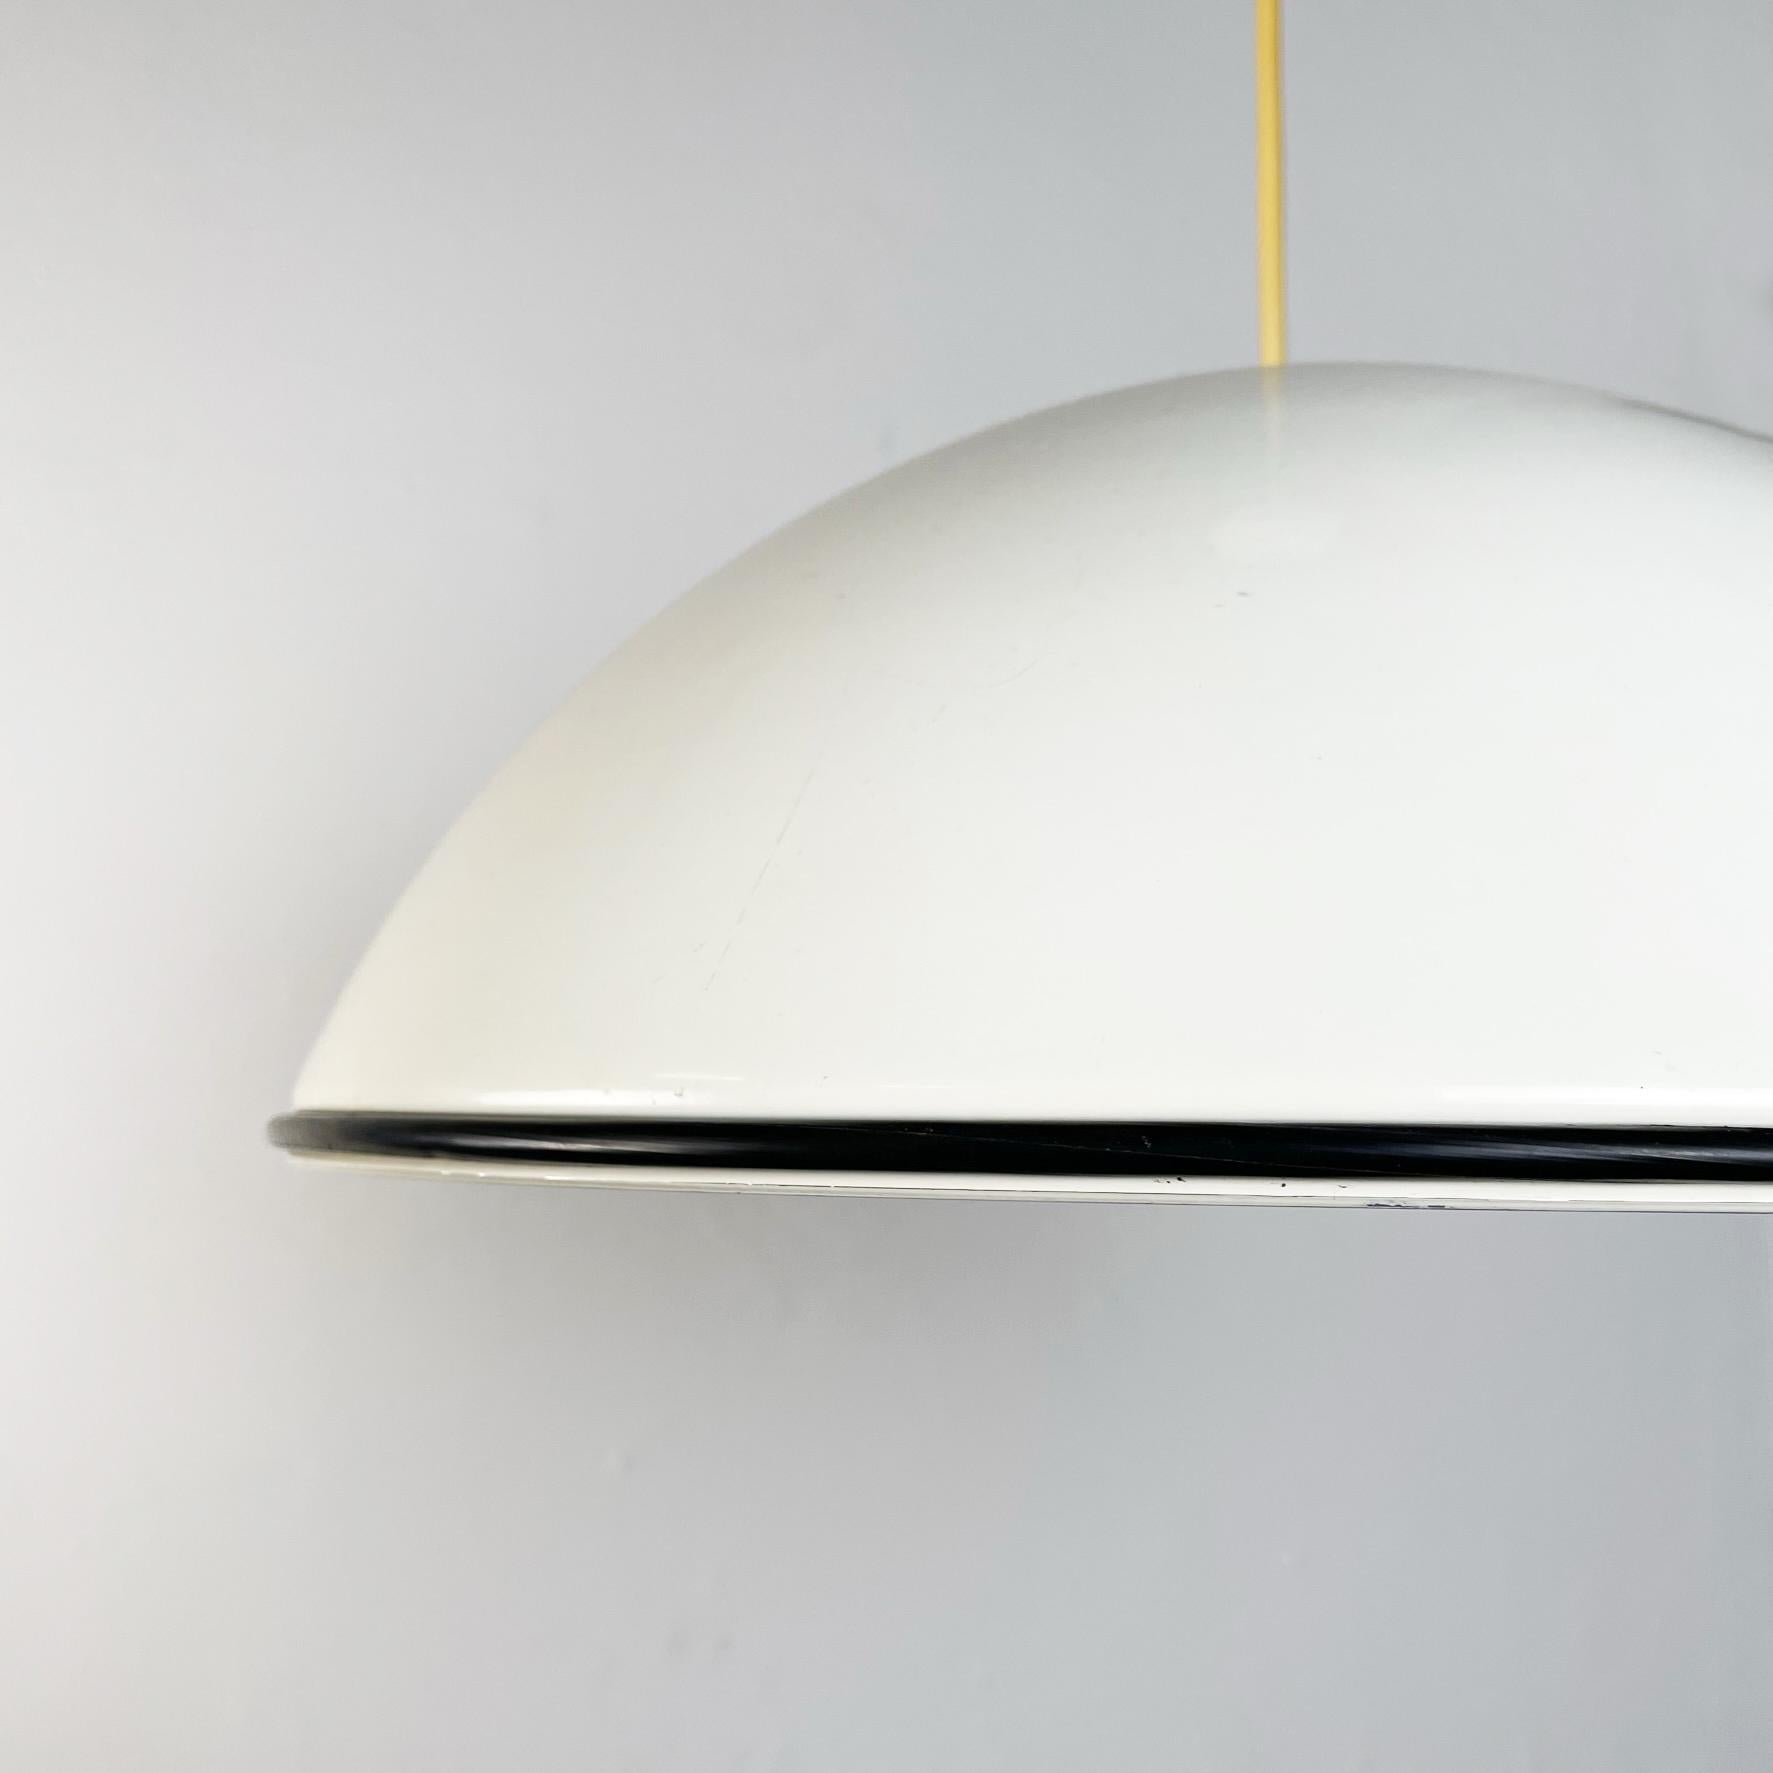 Late 20th Century Italian Mid-Century Metal Suspension Lamp Relemme by Castiglioni for Flos, 1970s